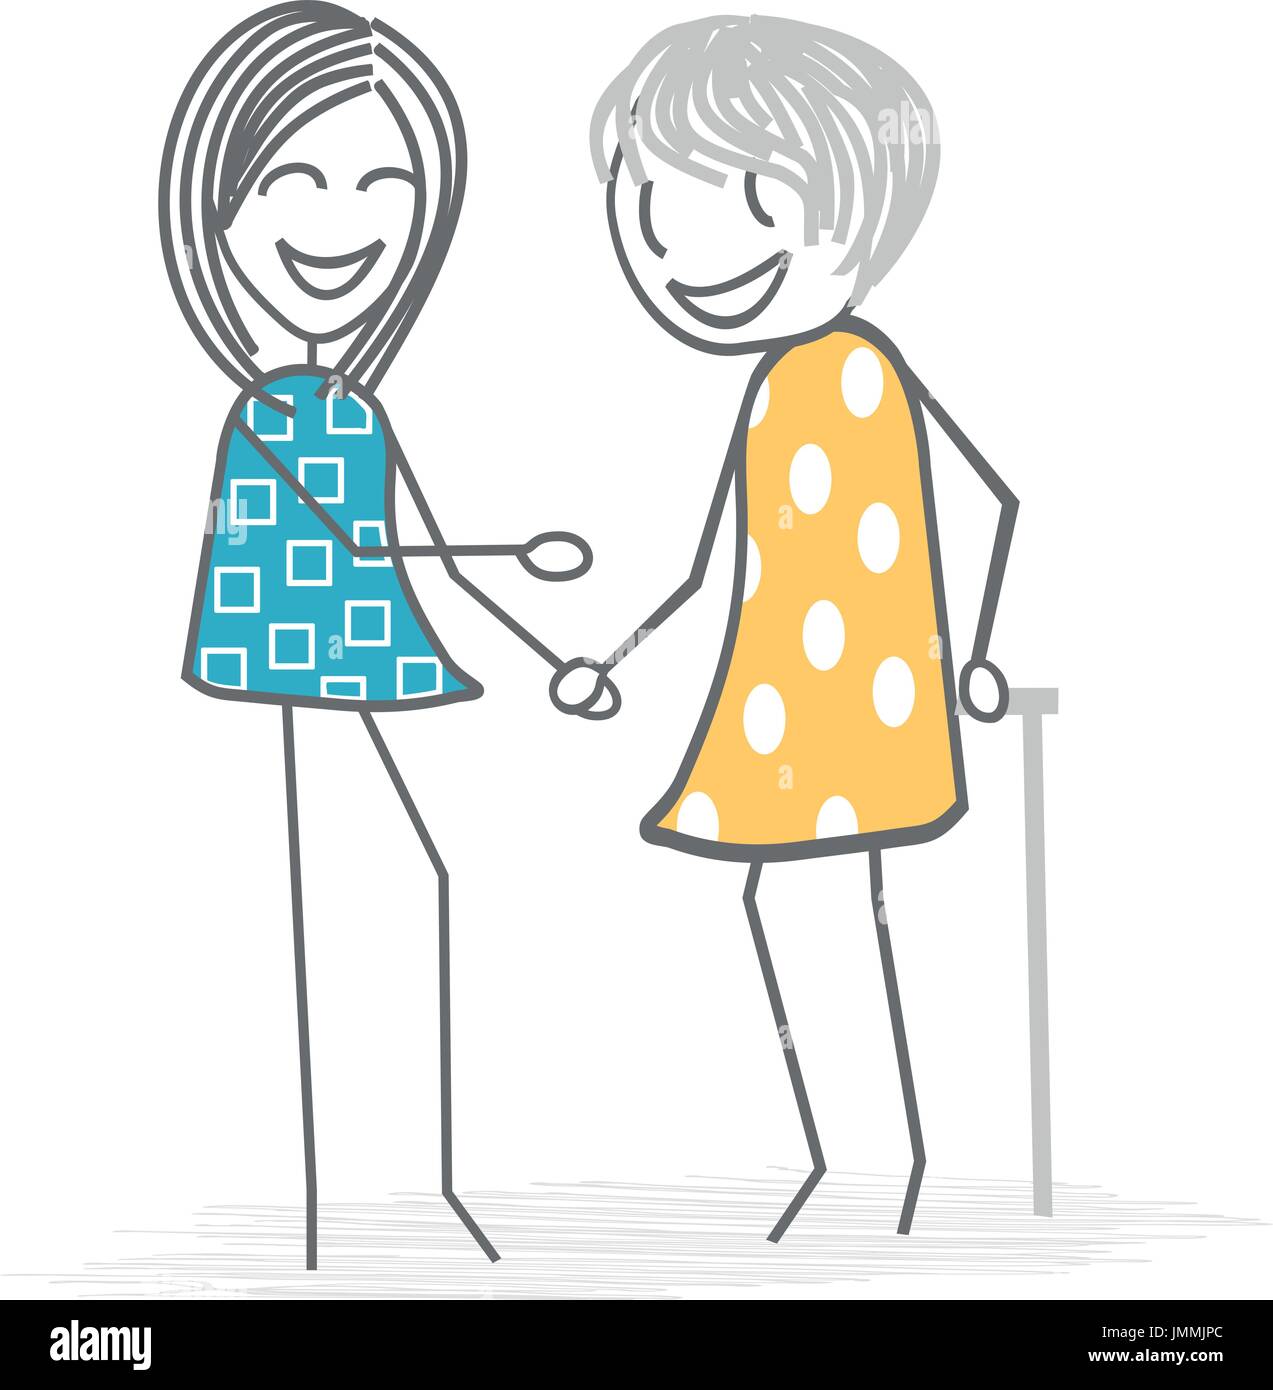 An old person is helped by a nurse, auxiliary, friend, or someone of her family Stock Vector